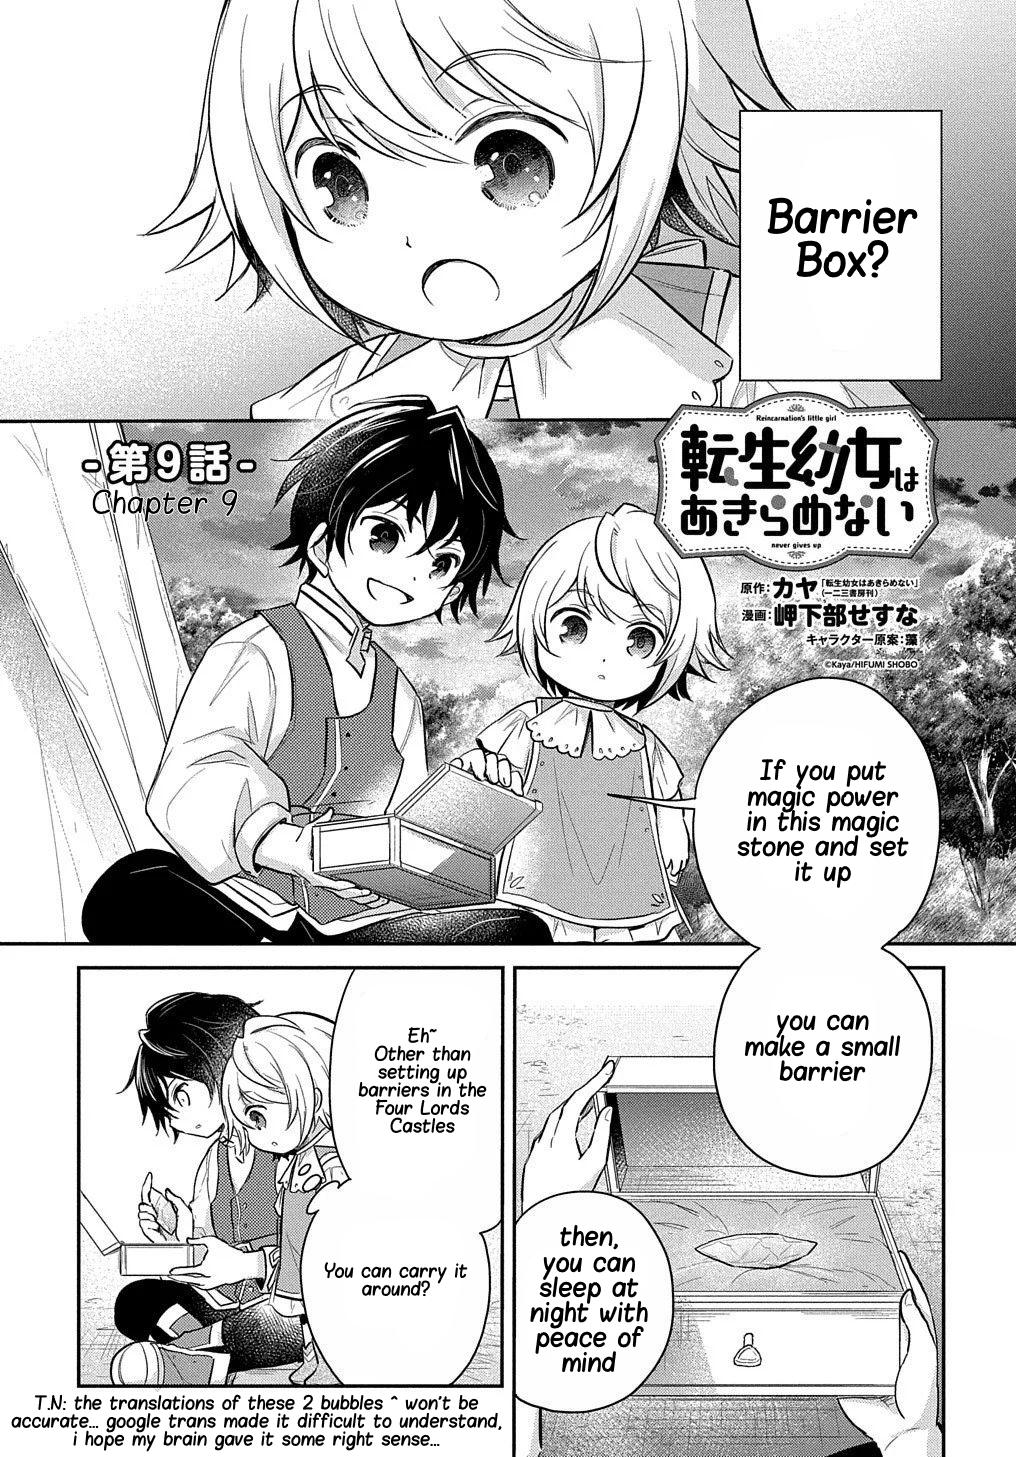 The Reborn Little Girl Won&rsquo;t Give Up - Page 2